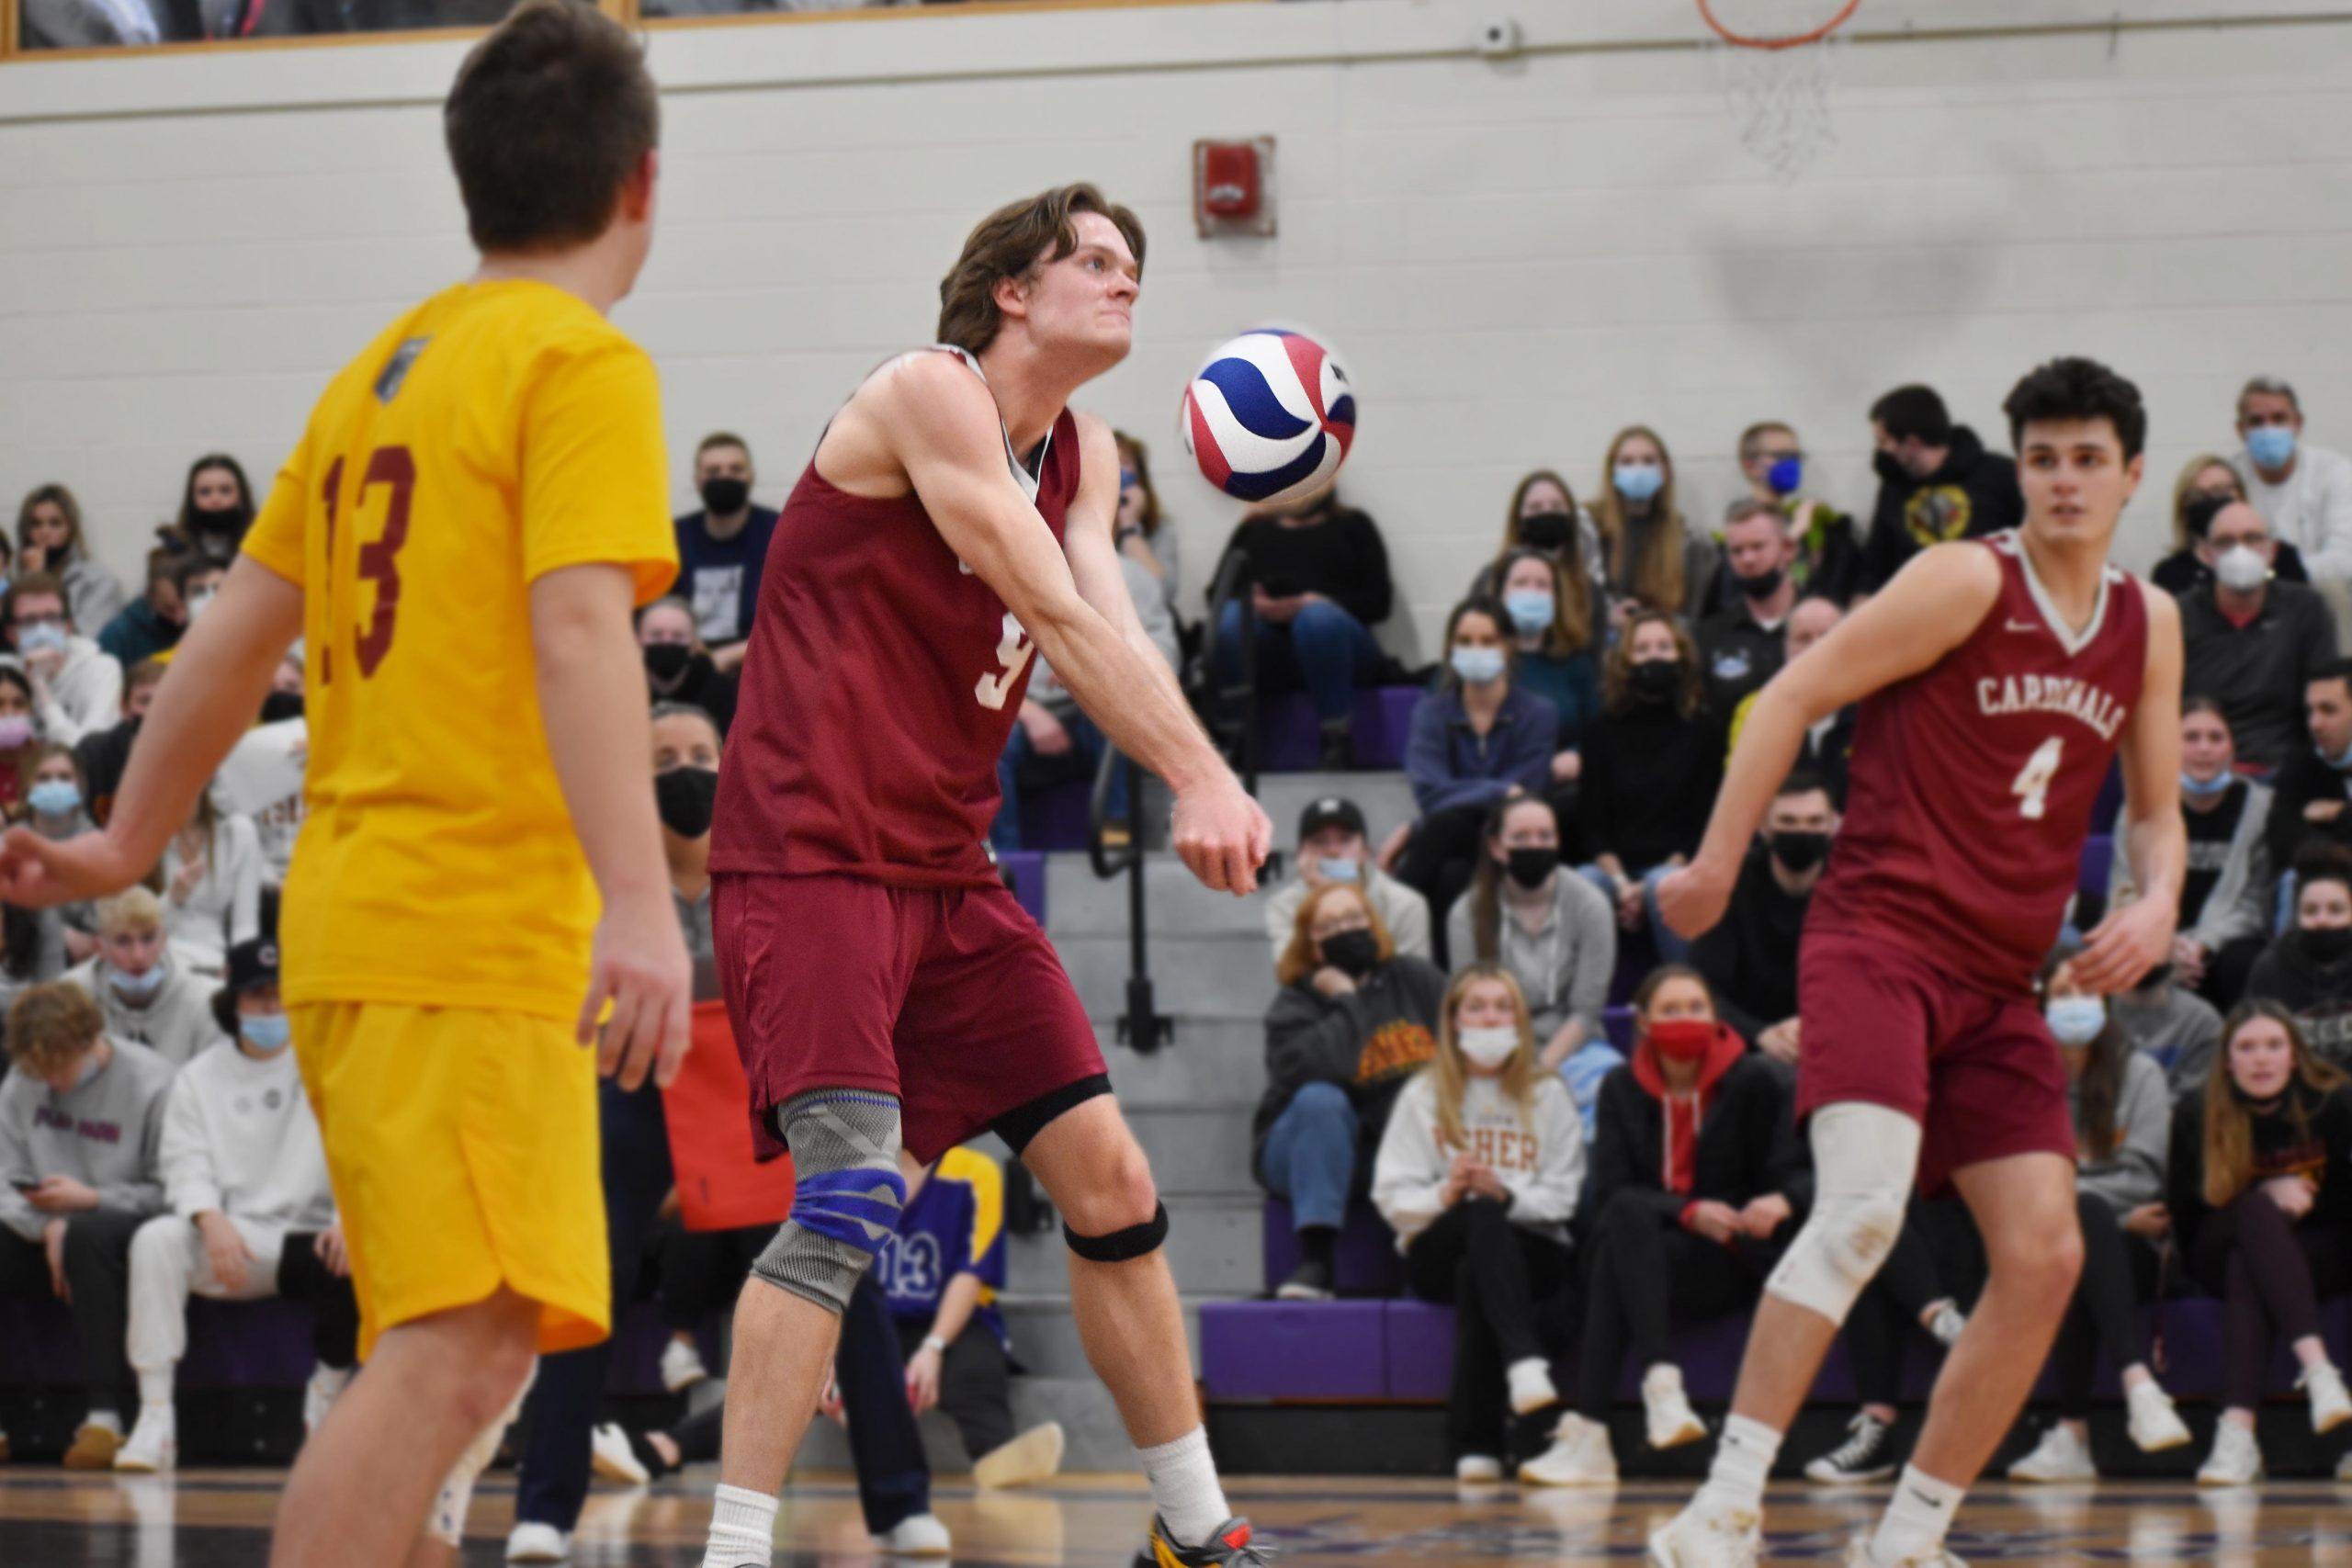 Battle+of+the+Beaks%3A+Men%E2%80%99s+Volleyball+Team+Faces+off+Against+Nazareth+College